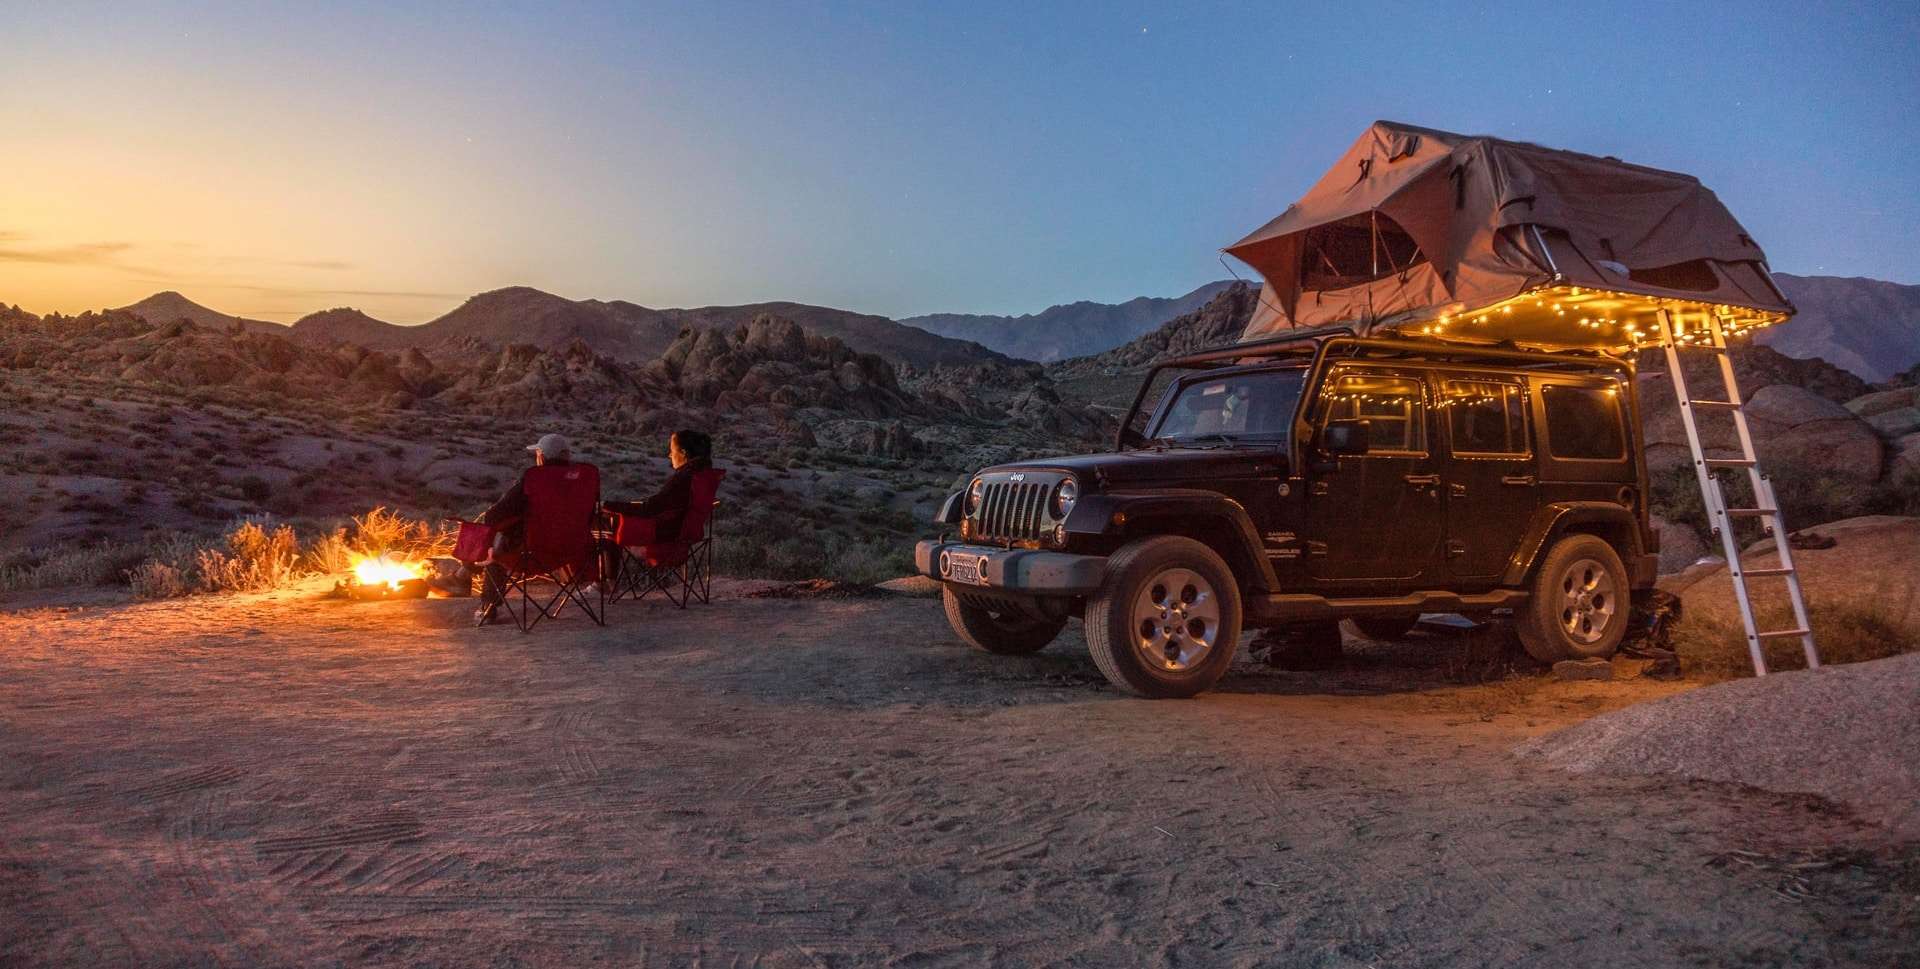 Black jeep camper with fairy lights and a couple seated by a fire in the desert.